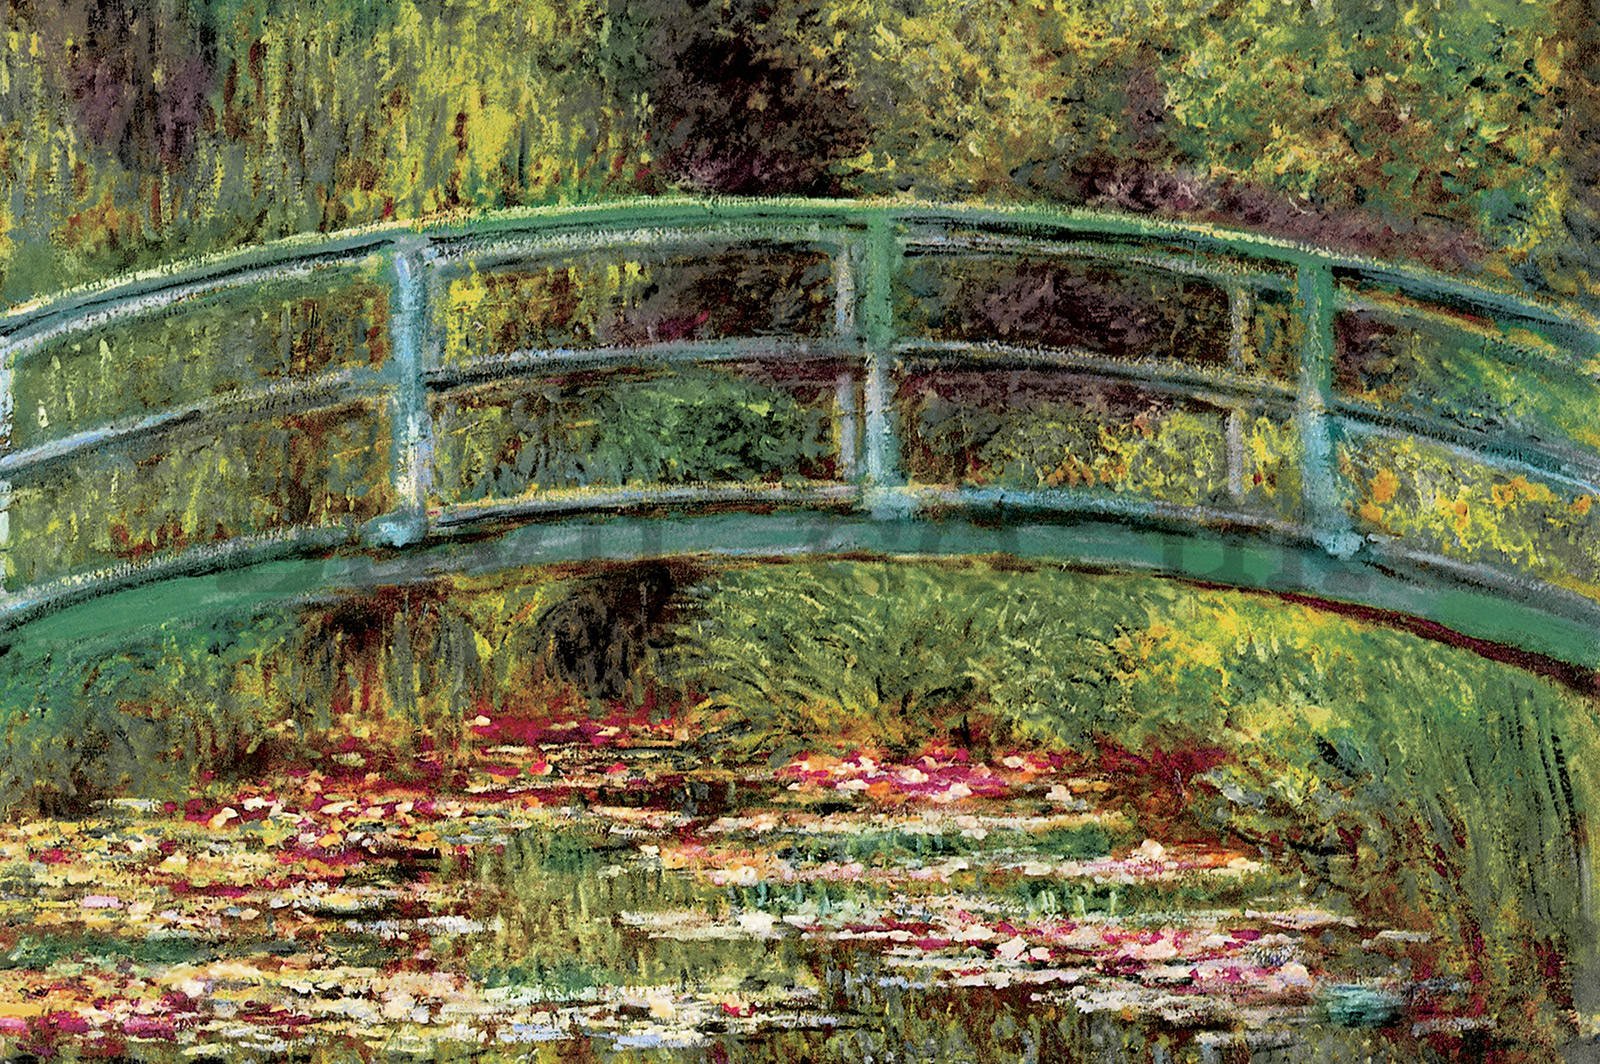 Vlies wall mural: Claude Monet, Pond with water lilies - 152,5x104 cm